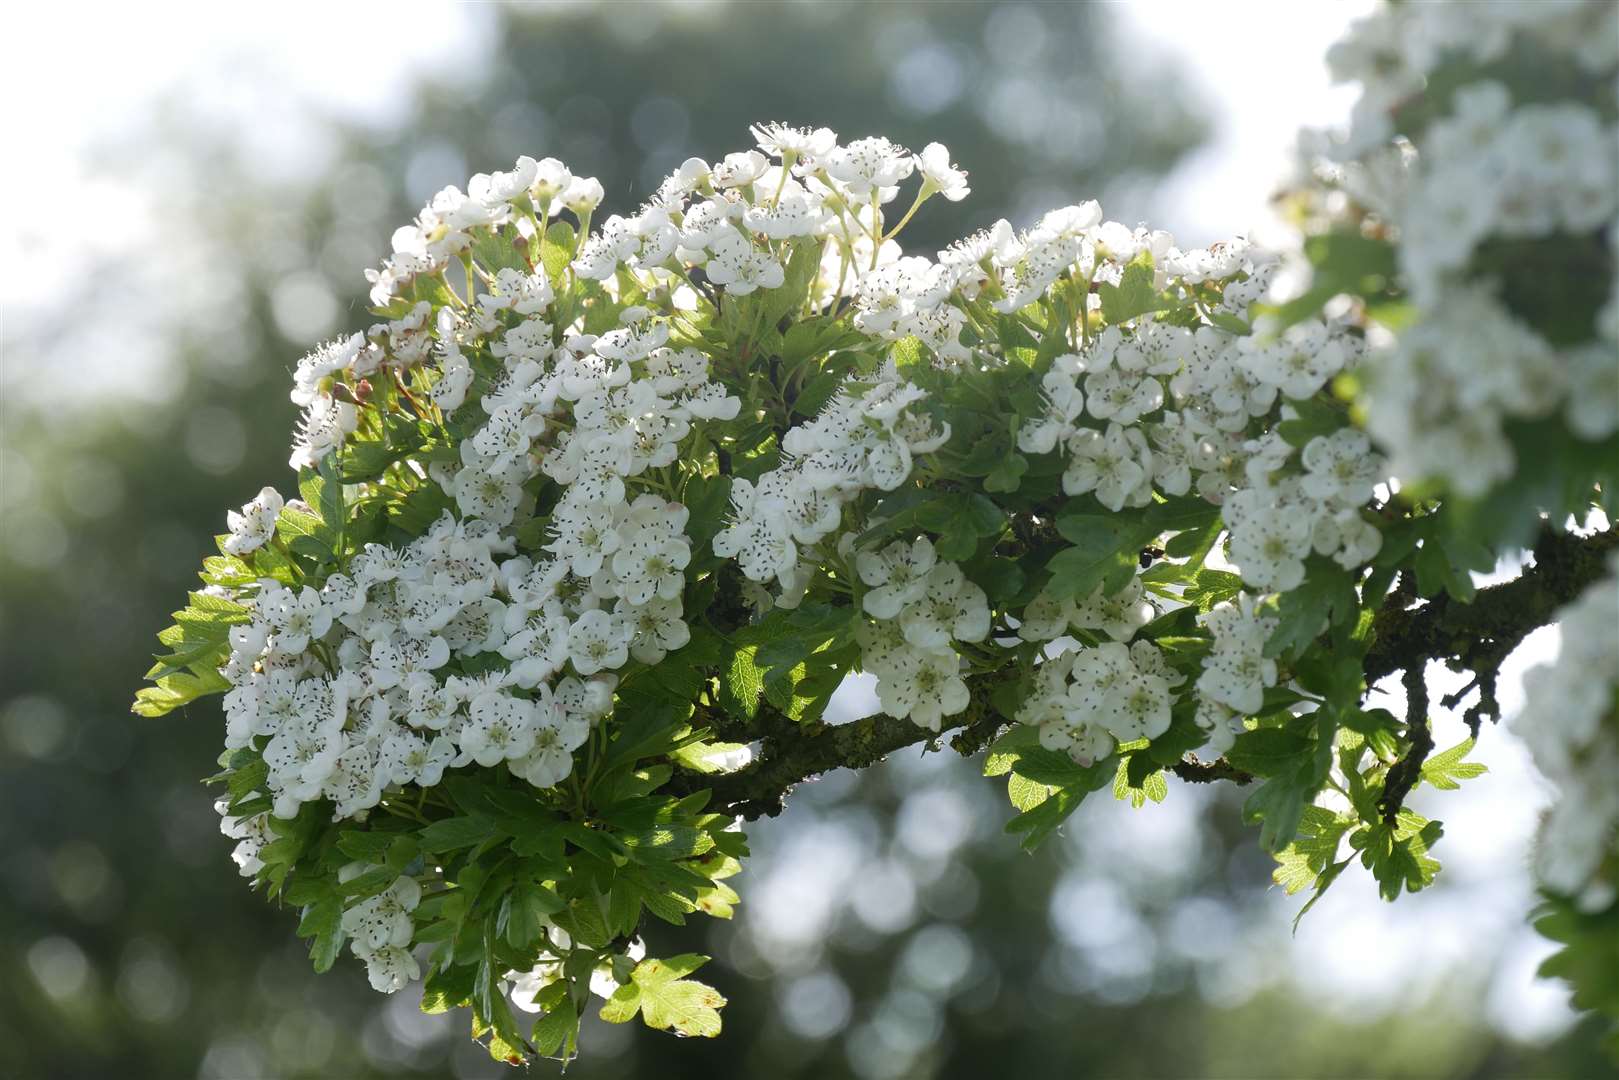 See the hawthorn blossoms at the end of spring. Picture: National Trust / Emma Weston